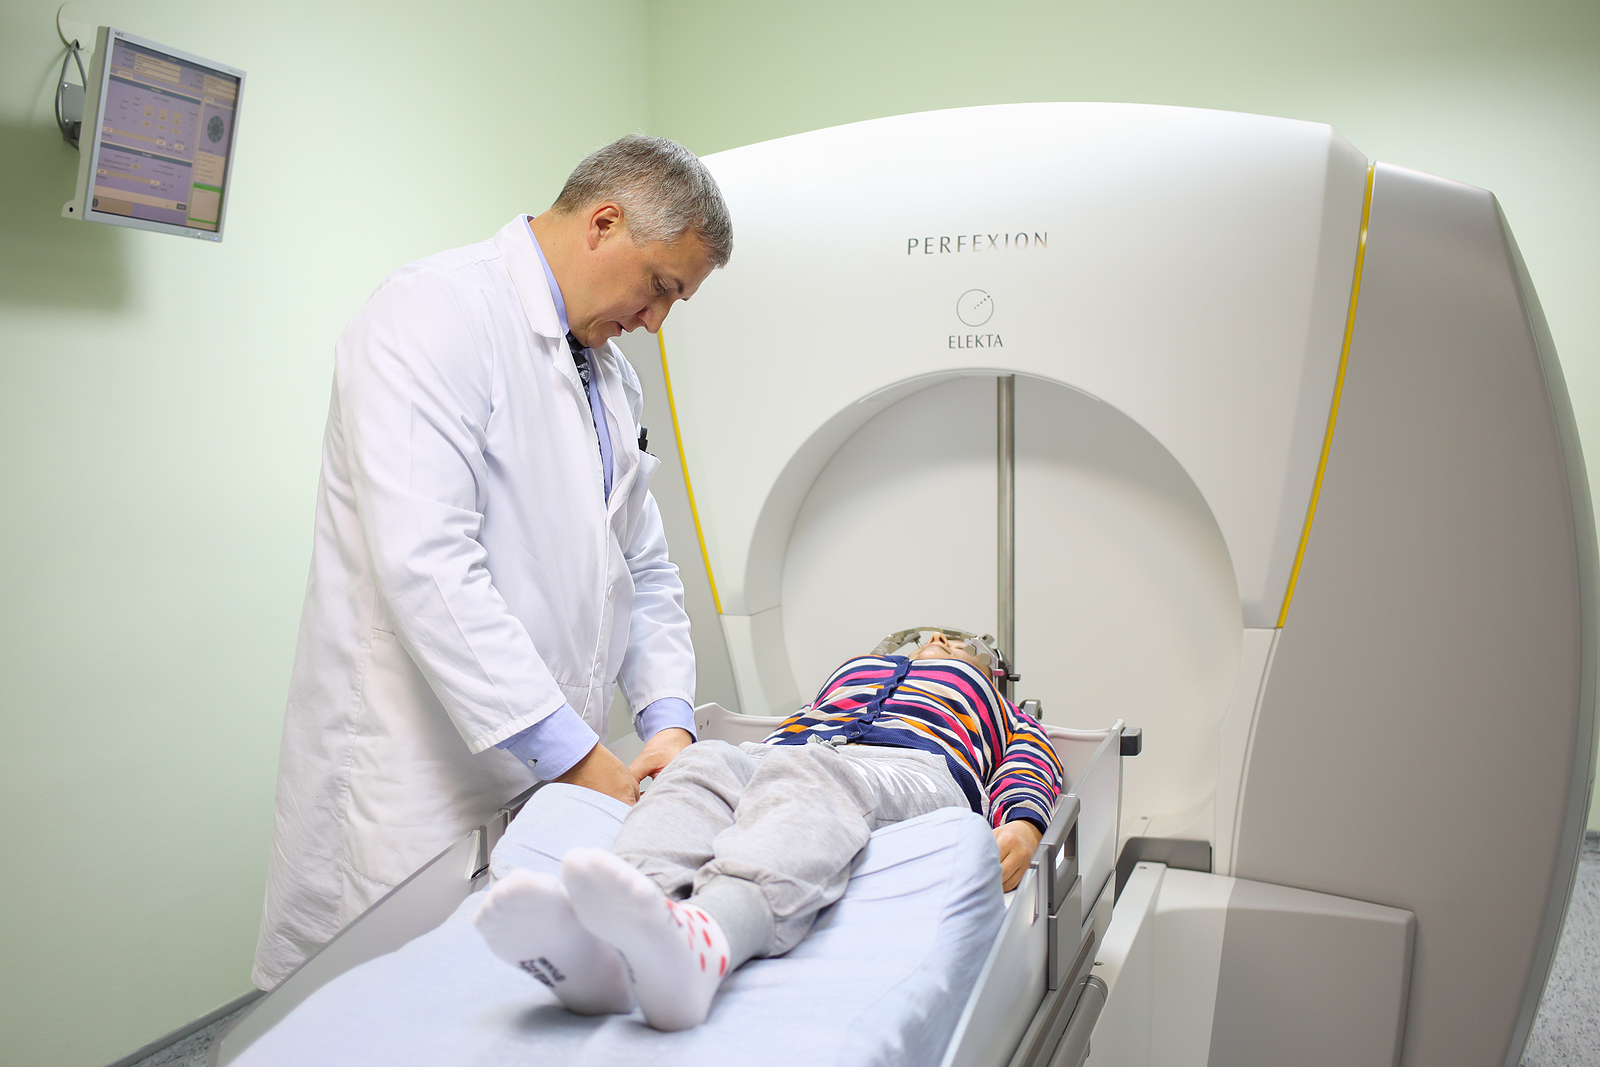 gamma knife radiosurgery - physician prepares patient for the procedure on the Gamma Knife